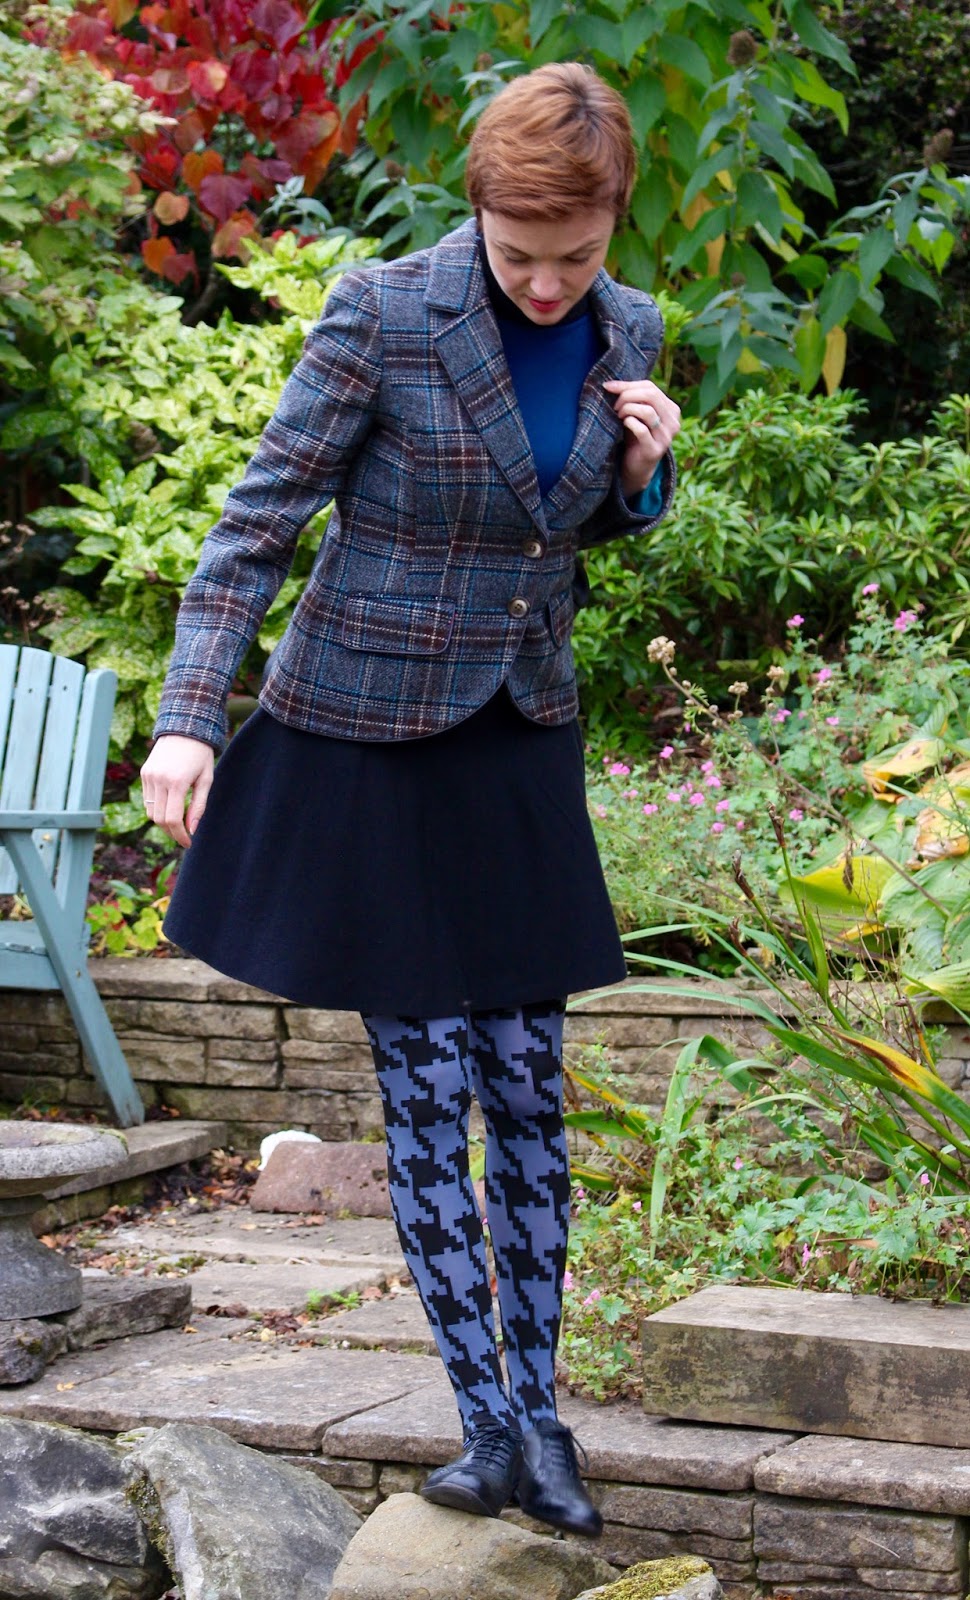 Heritage style, tweed and houndstooth | Fake fabulous